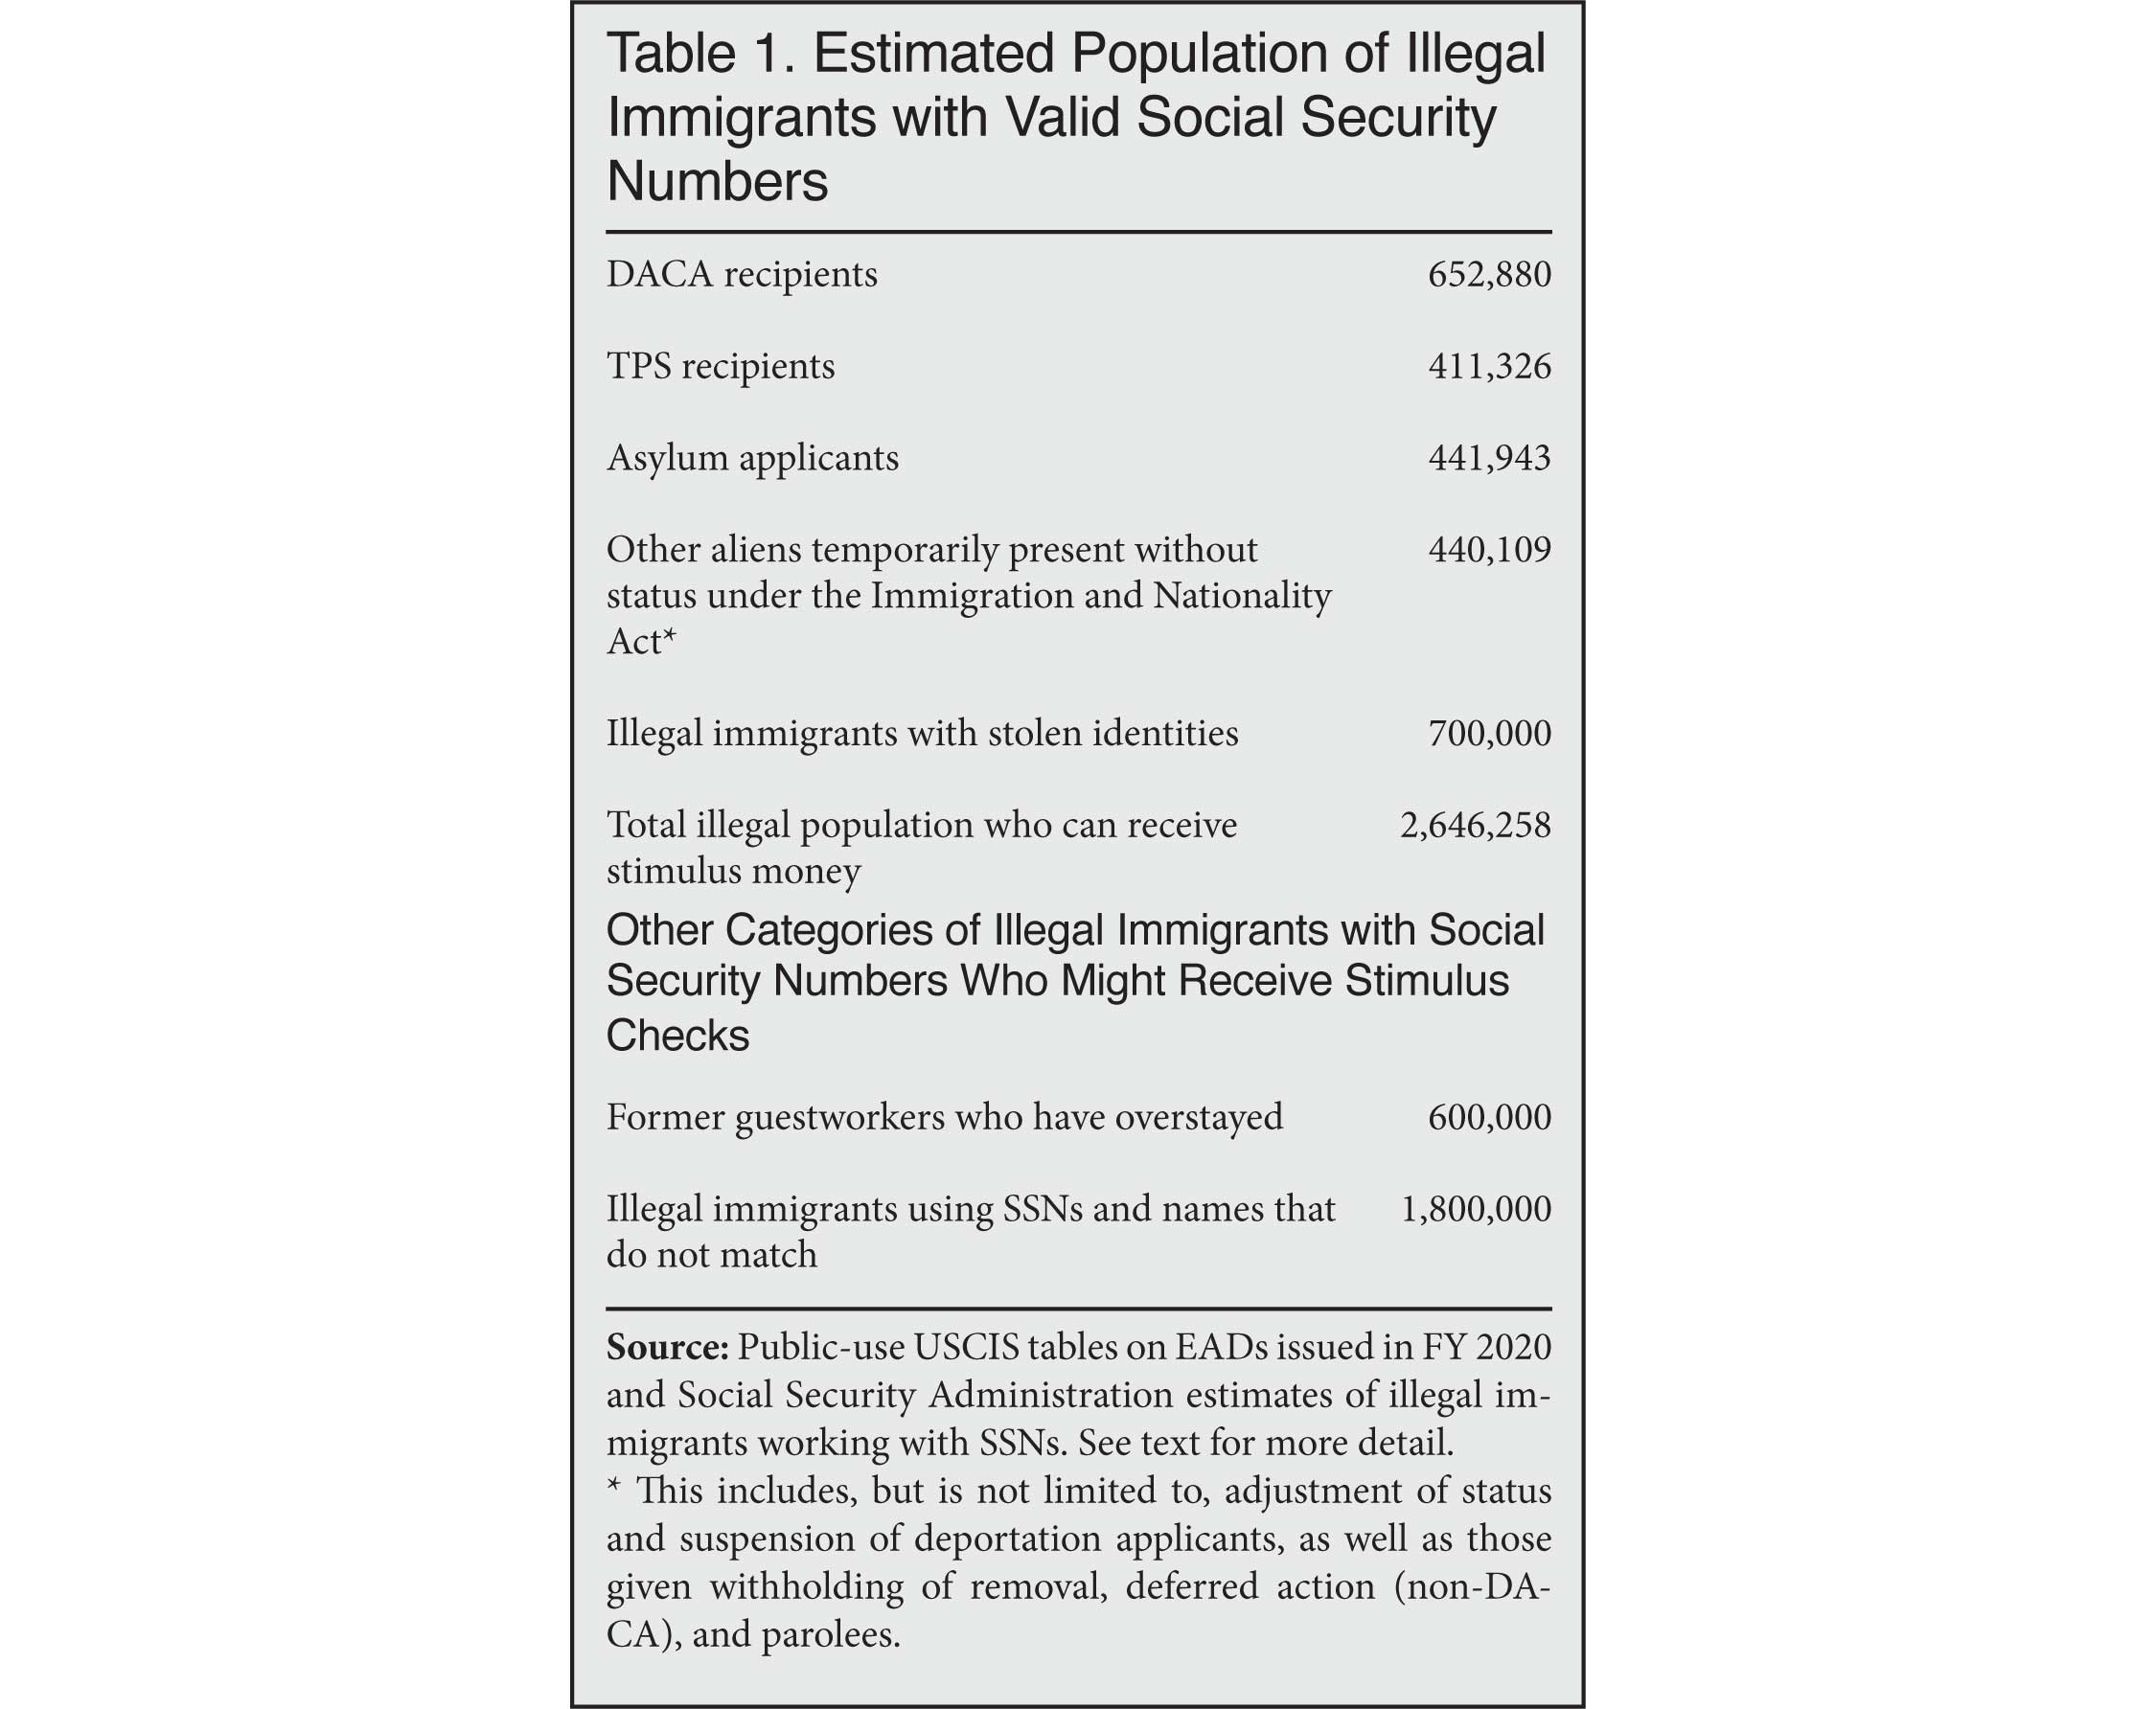 Table: Estimated Population of Illegal Immigrants with Valid Social Security Numbers